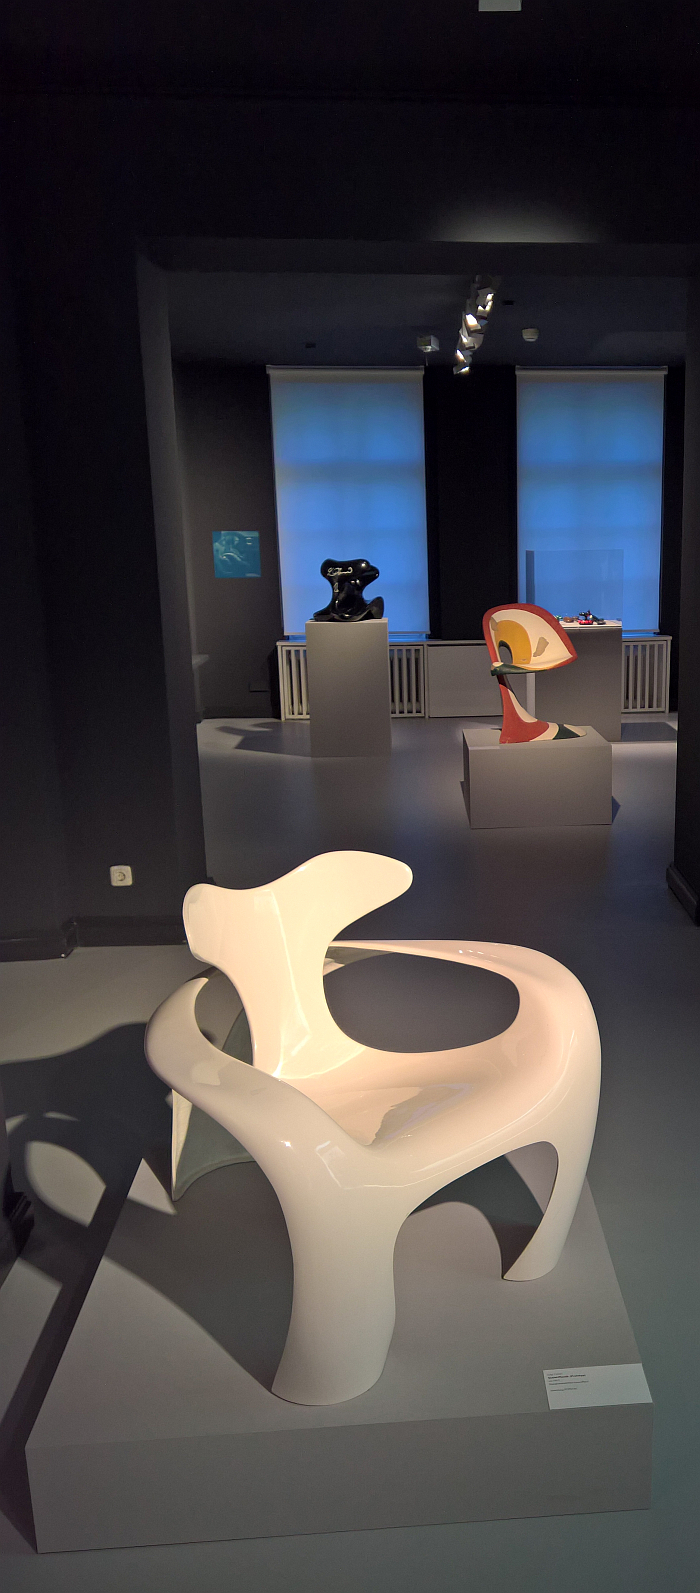 The armchair Swinger by Luigi Colani, and behind it a 1965 prototype, as seen at Luigi Colani and Art Nouveau, Bröhan-Museum, Berlin